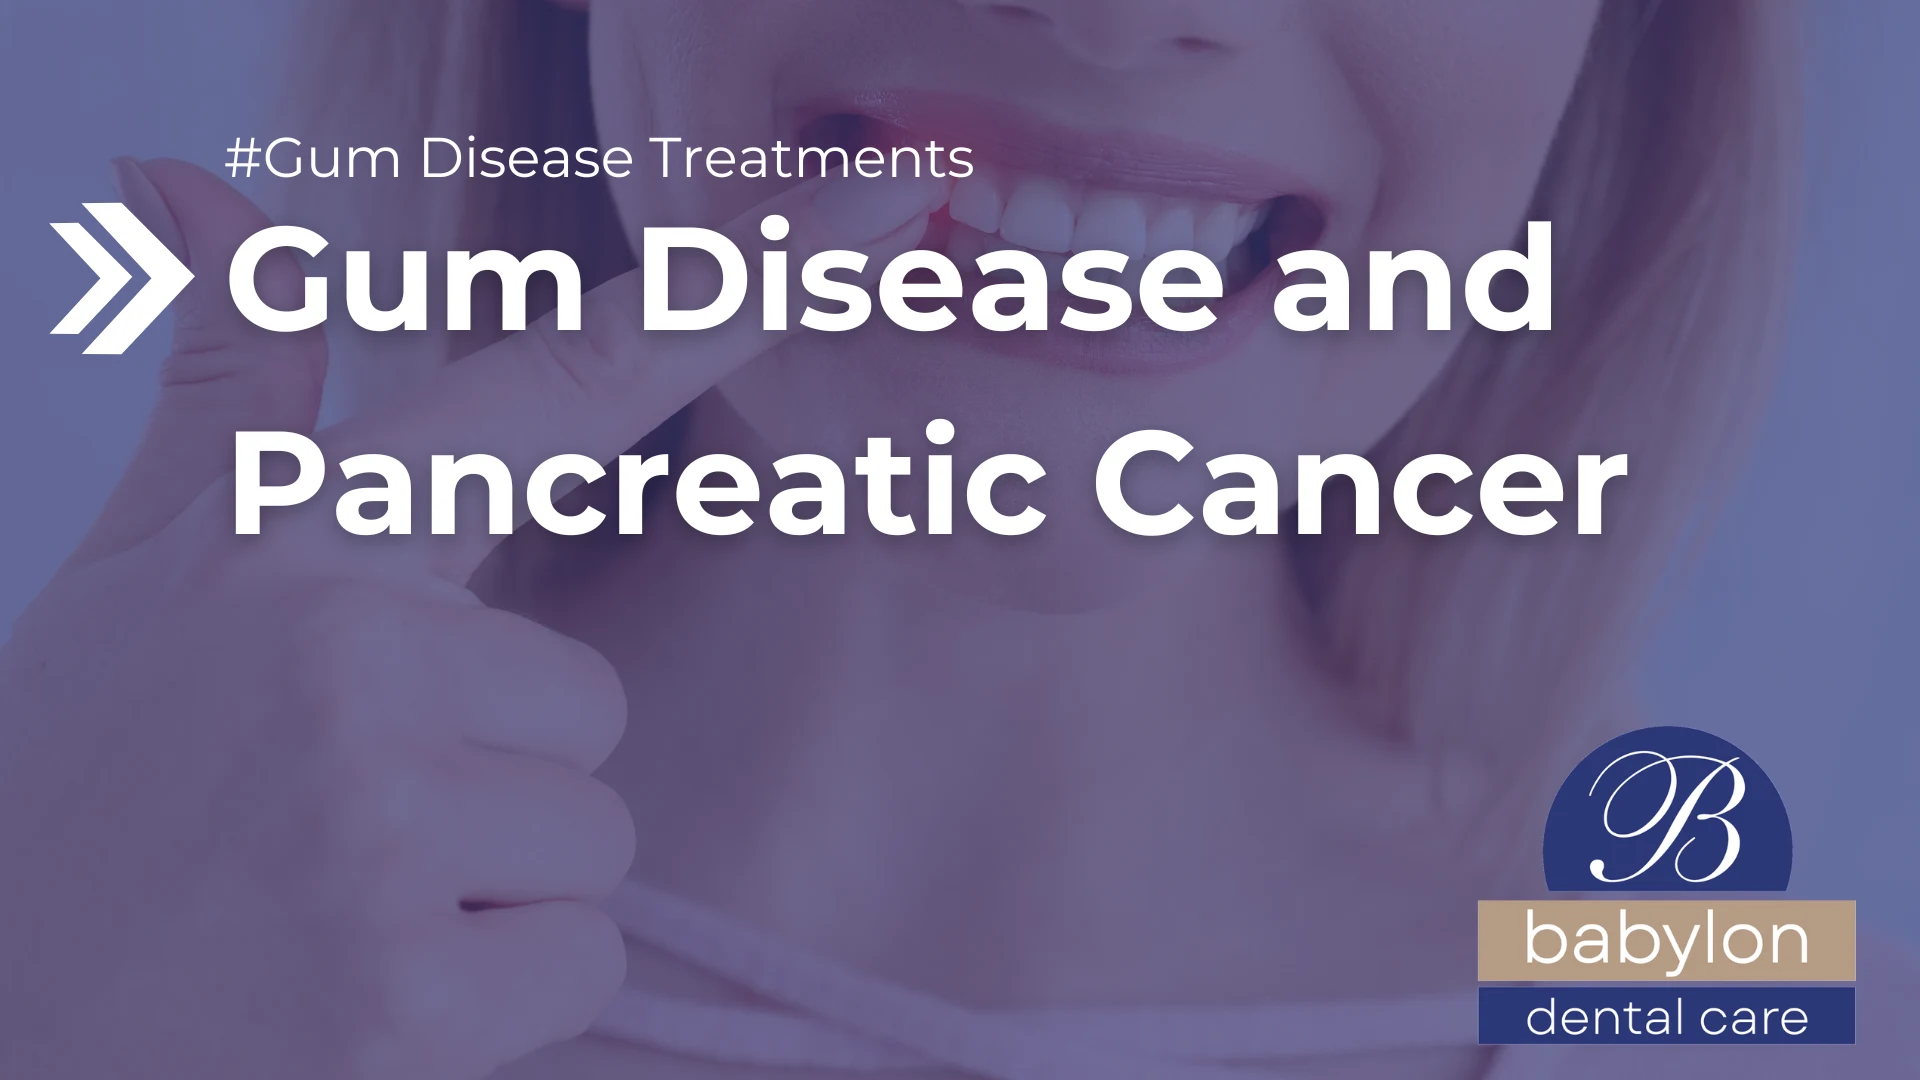 Gum Disease and Pancreatic Cancer Image - new logo